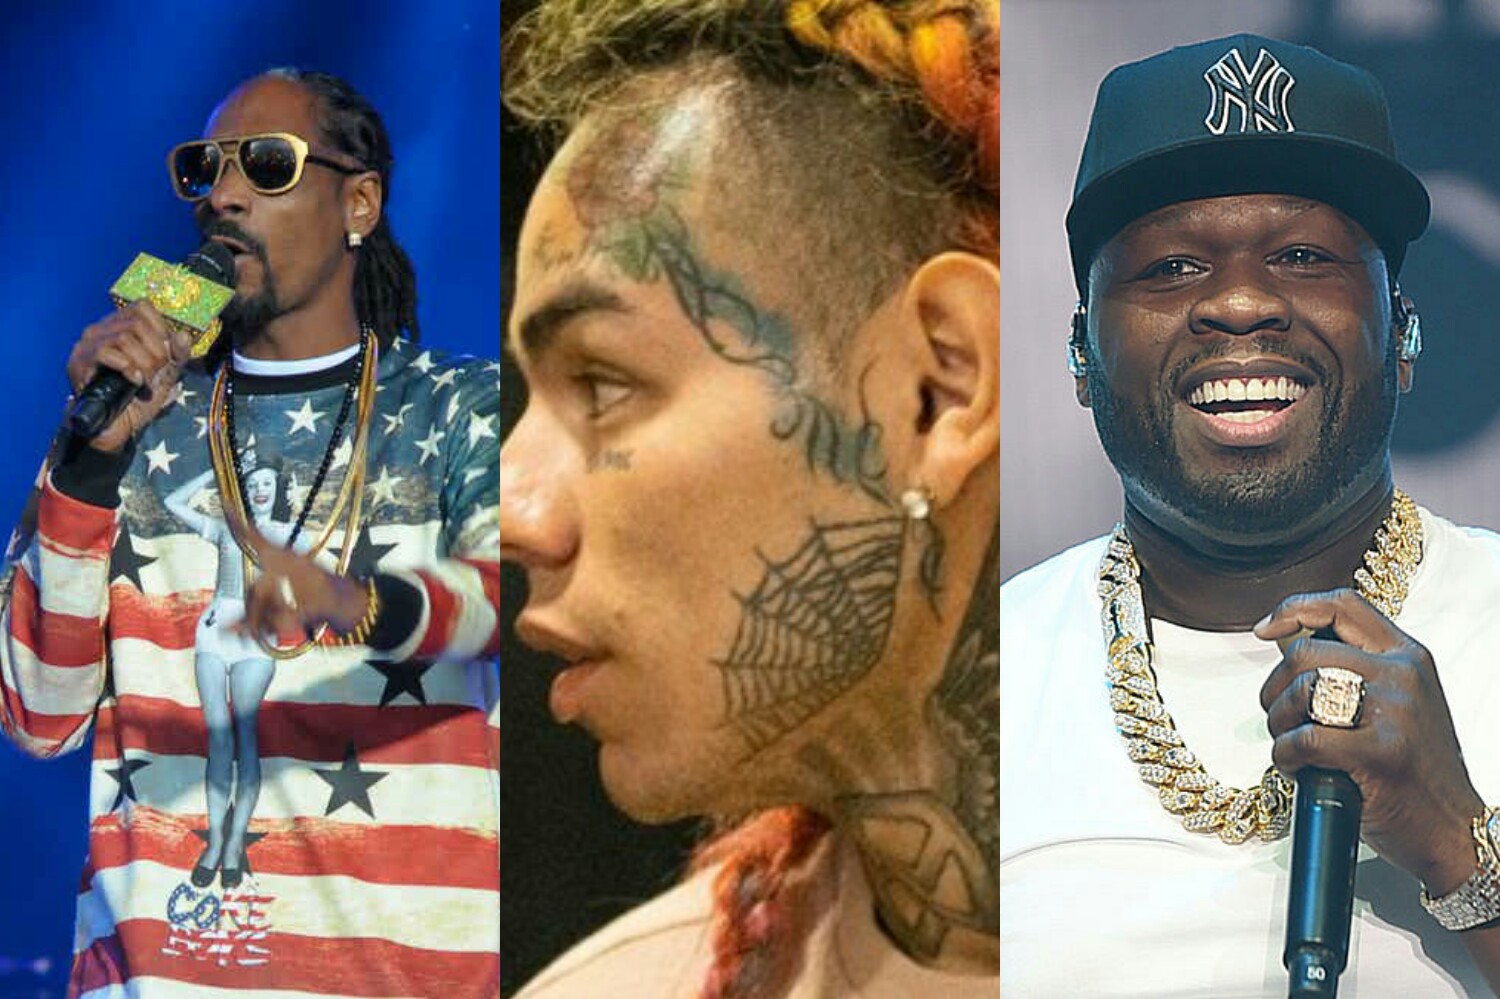 Snoop Dogg, 50 Cent and Meek Mill Faces Tekashi 6ix9ine After Prison Response